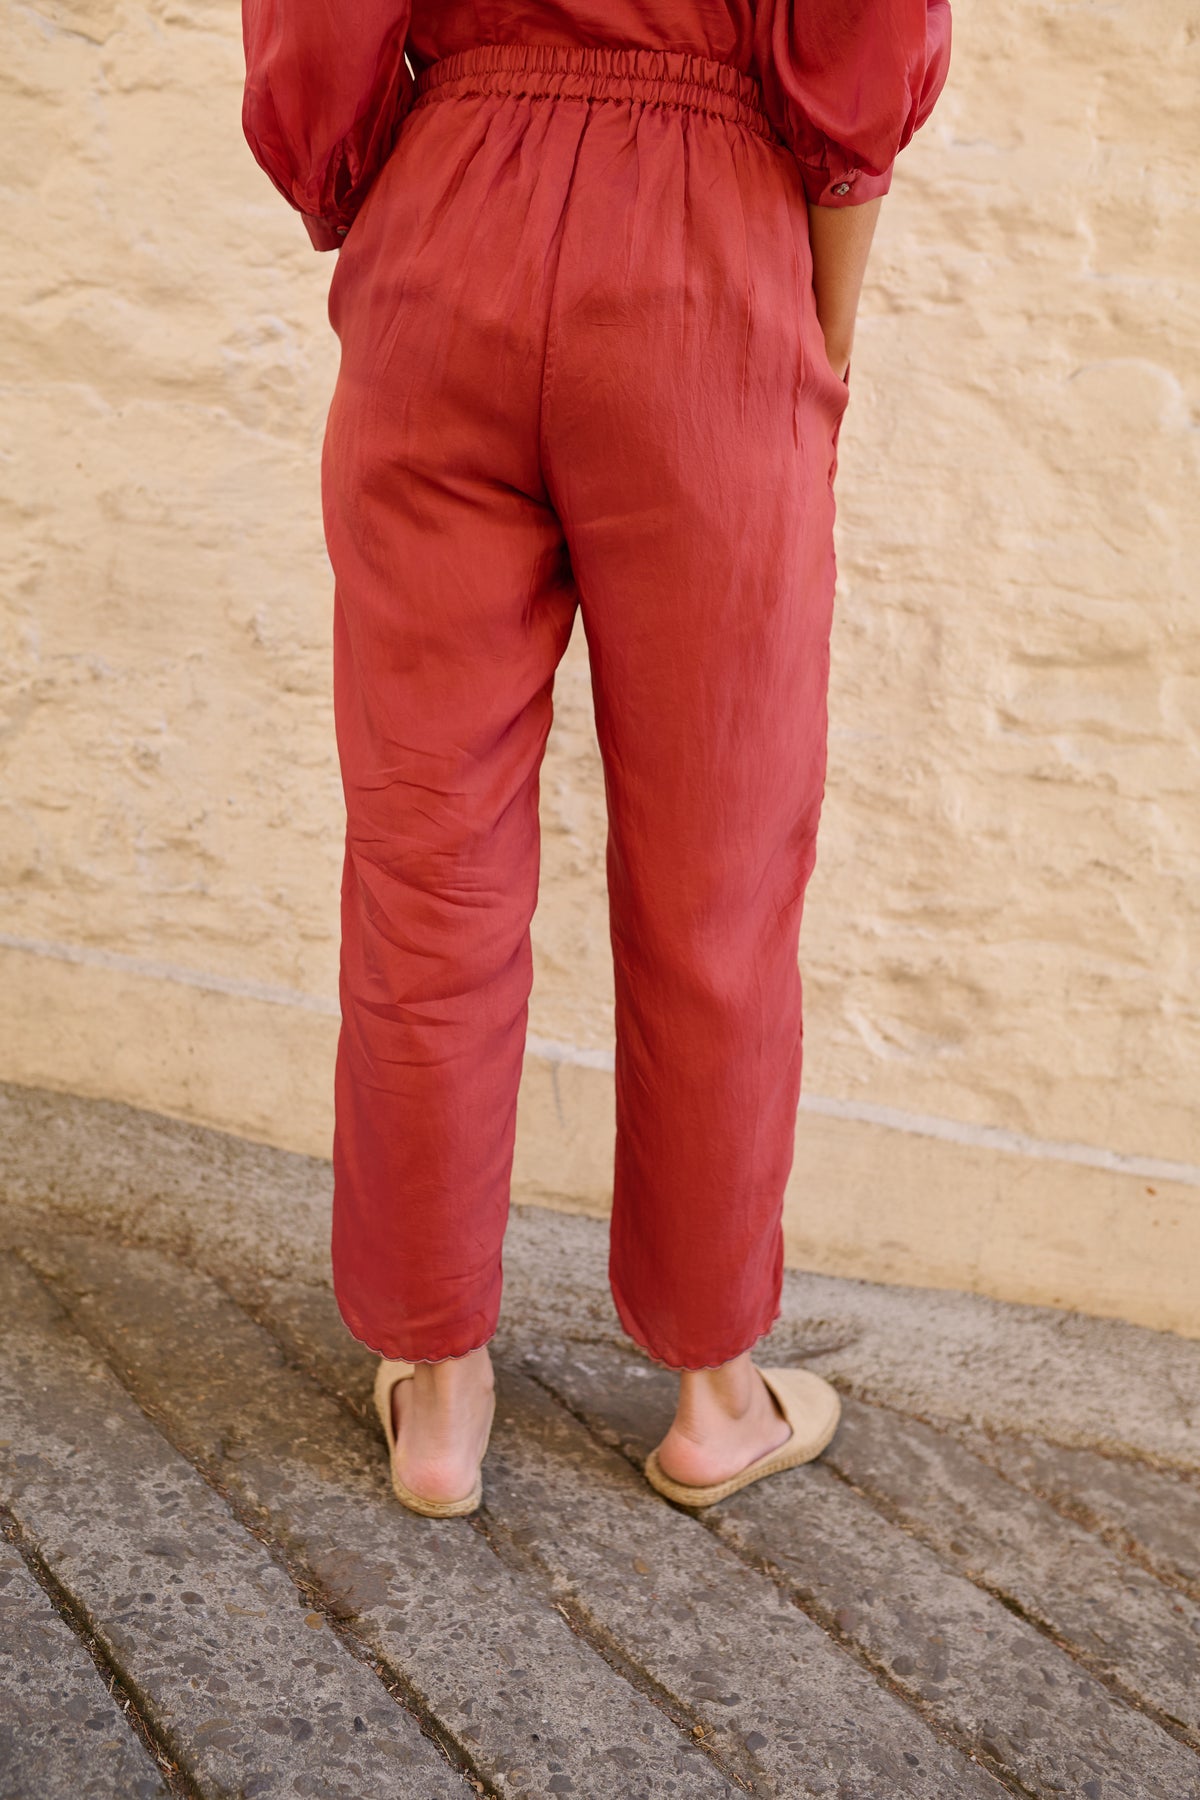 Pull on striper trousers with pockets and scalloped hem